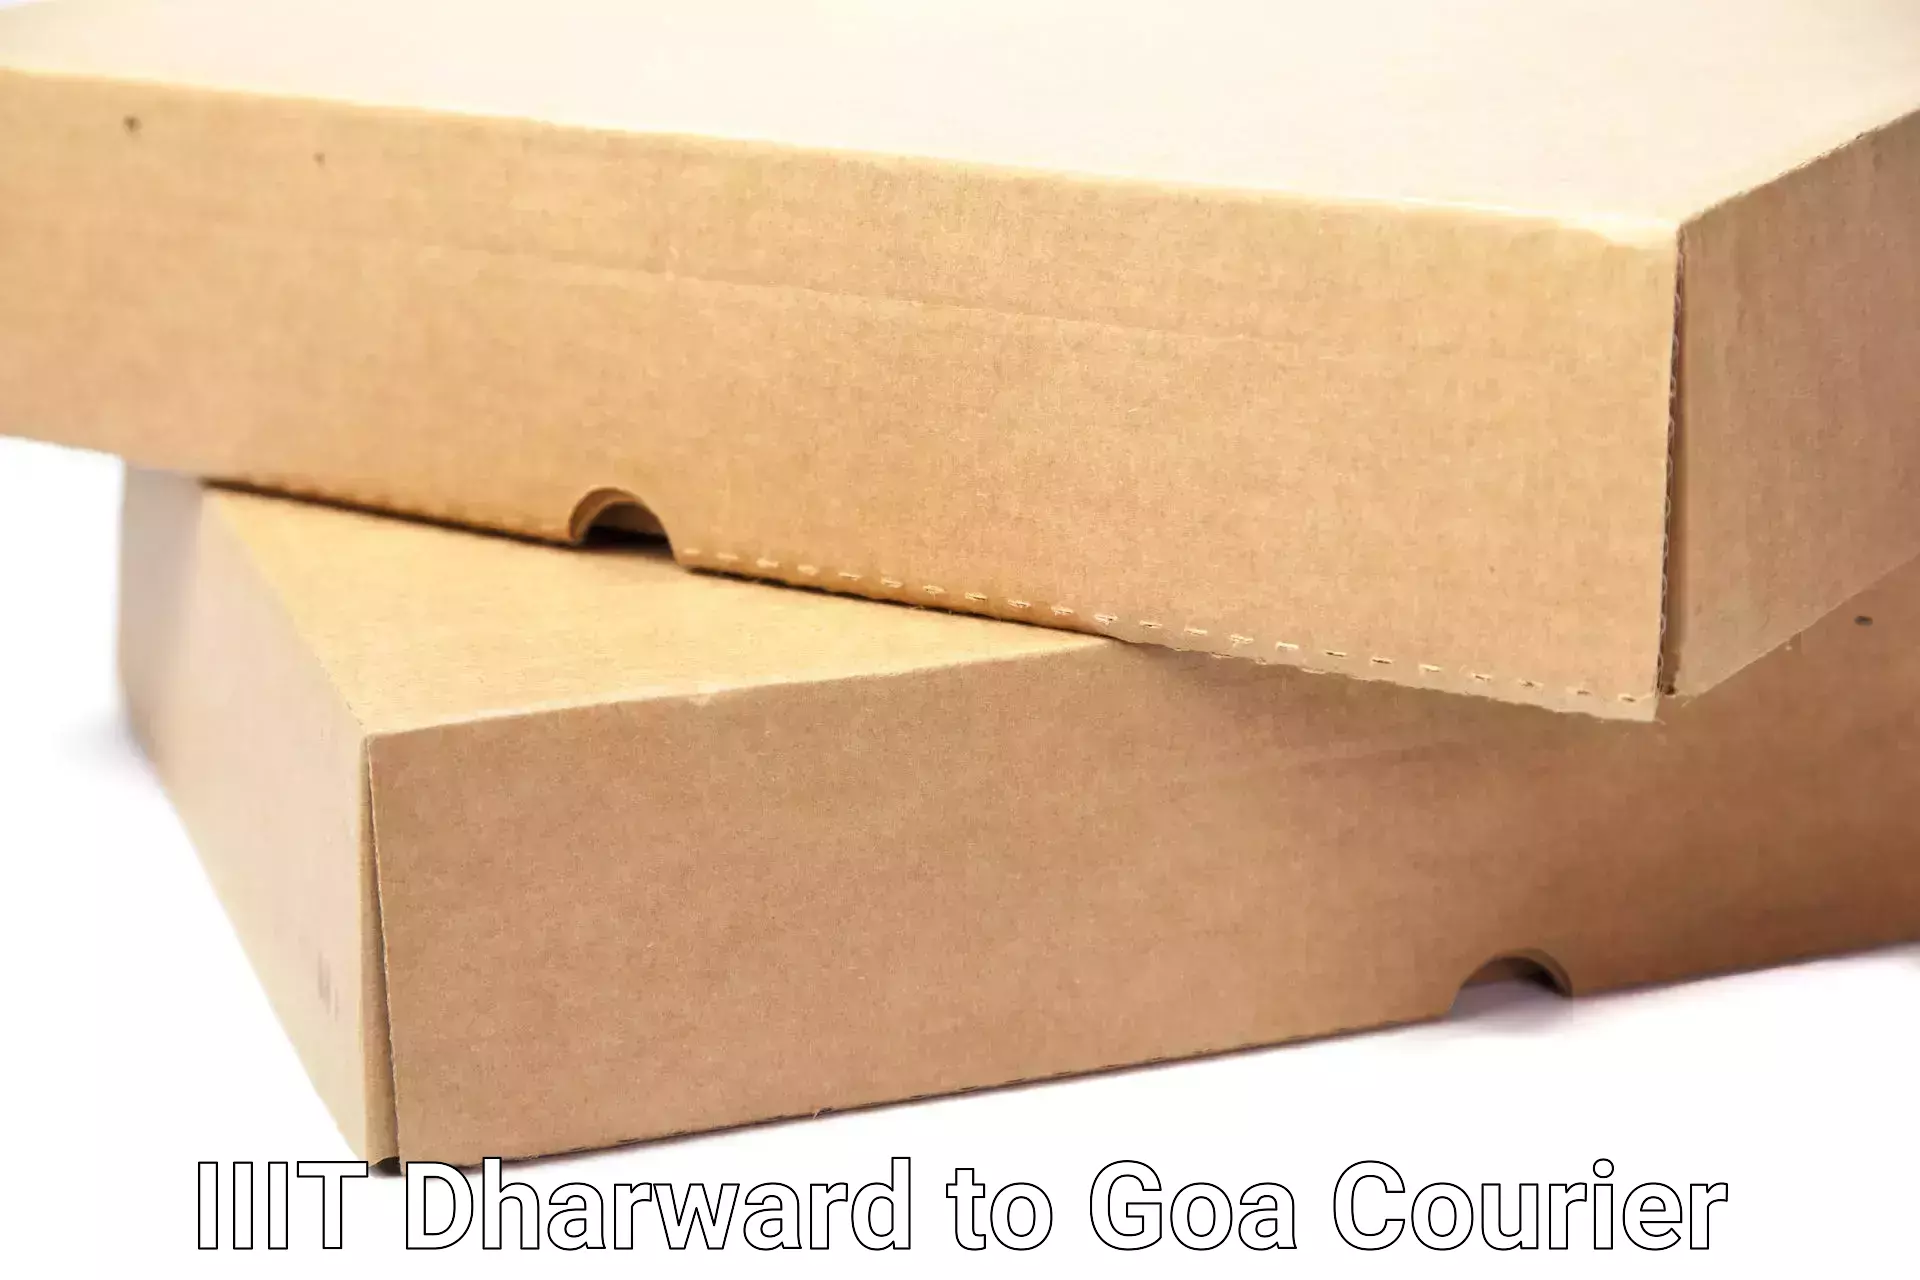 Furniture relocation experts IIIT Dharward to South Goa